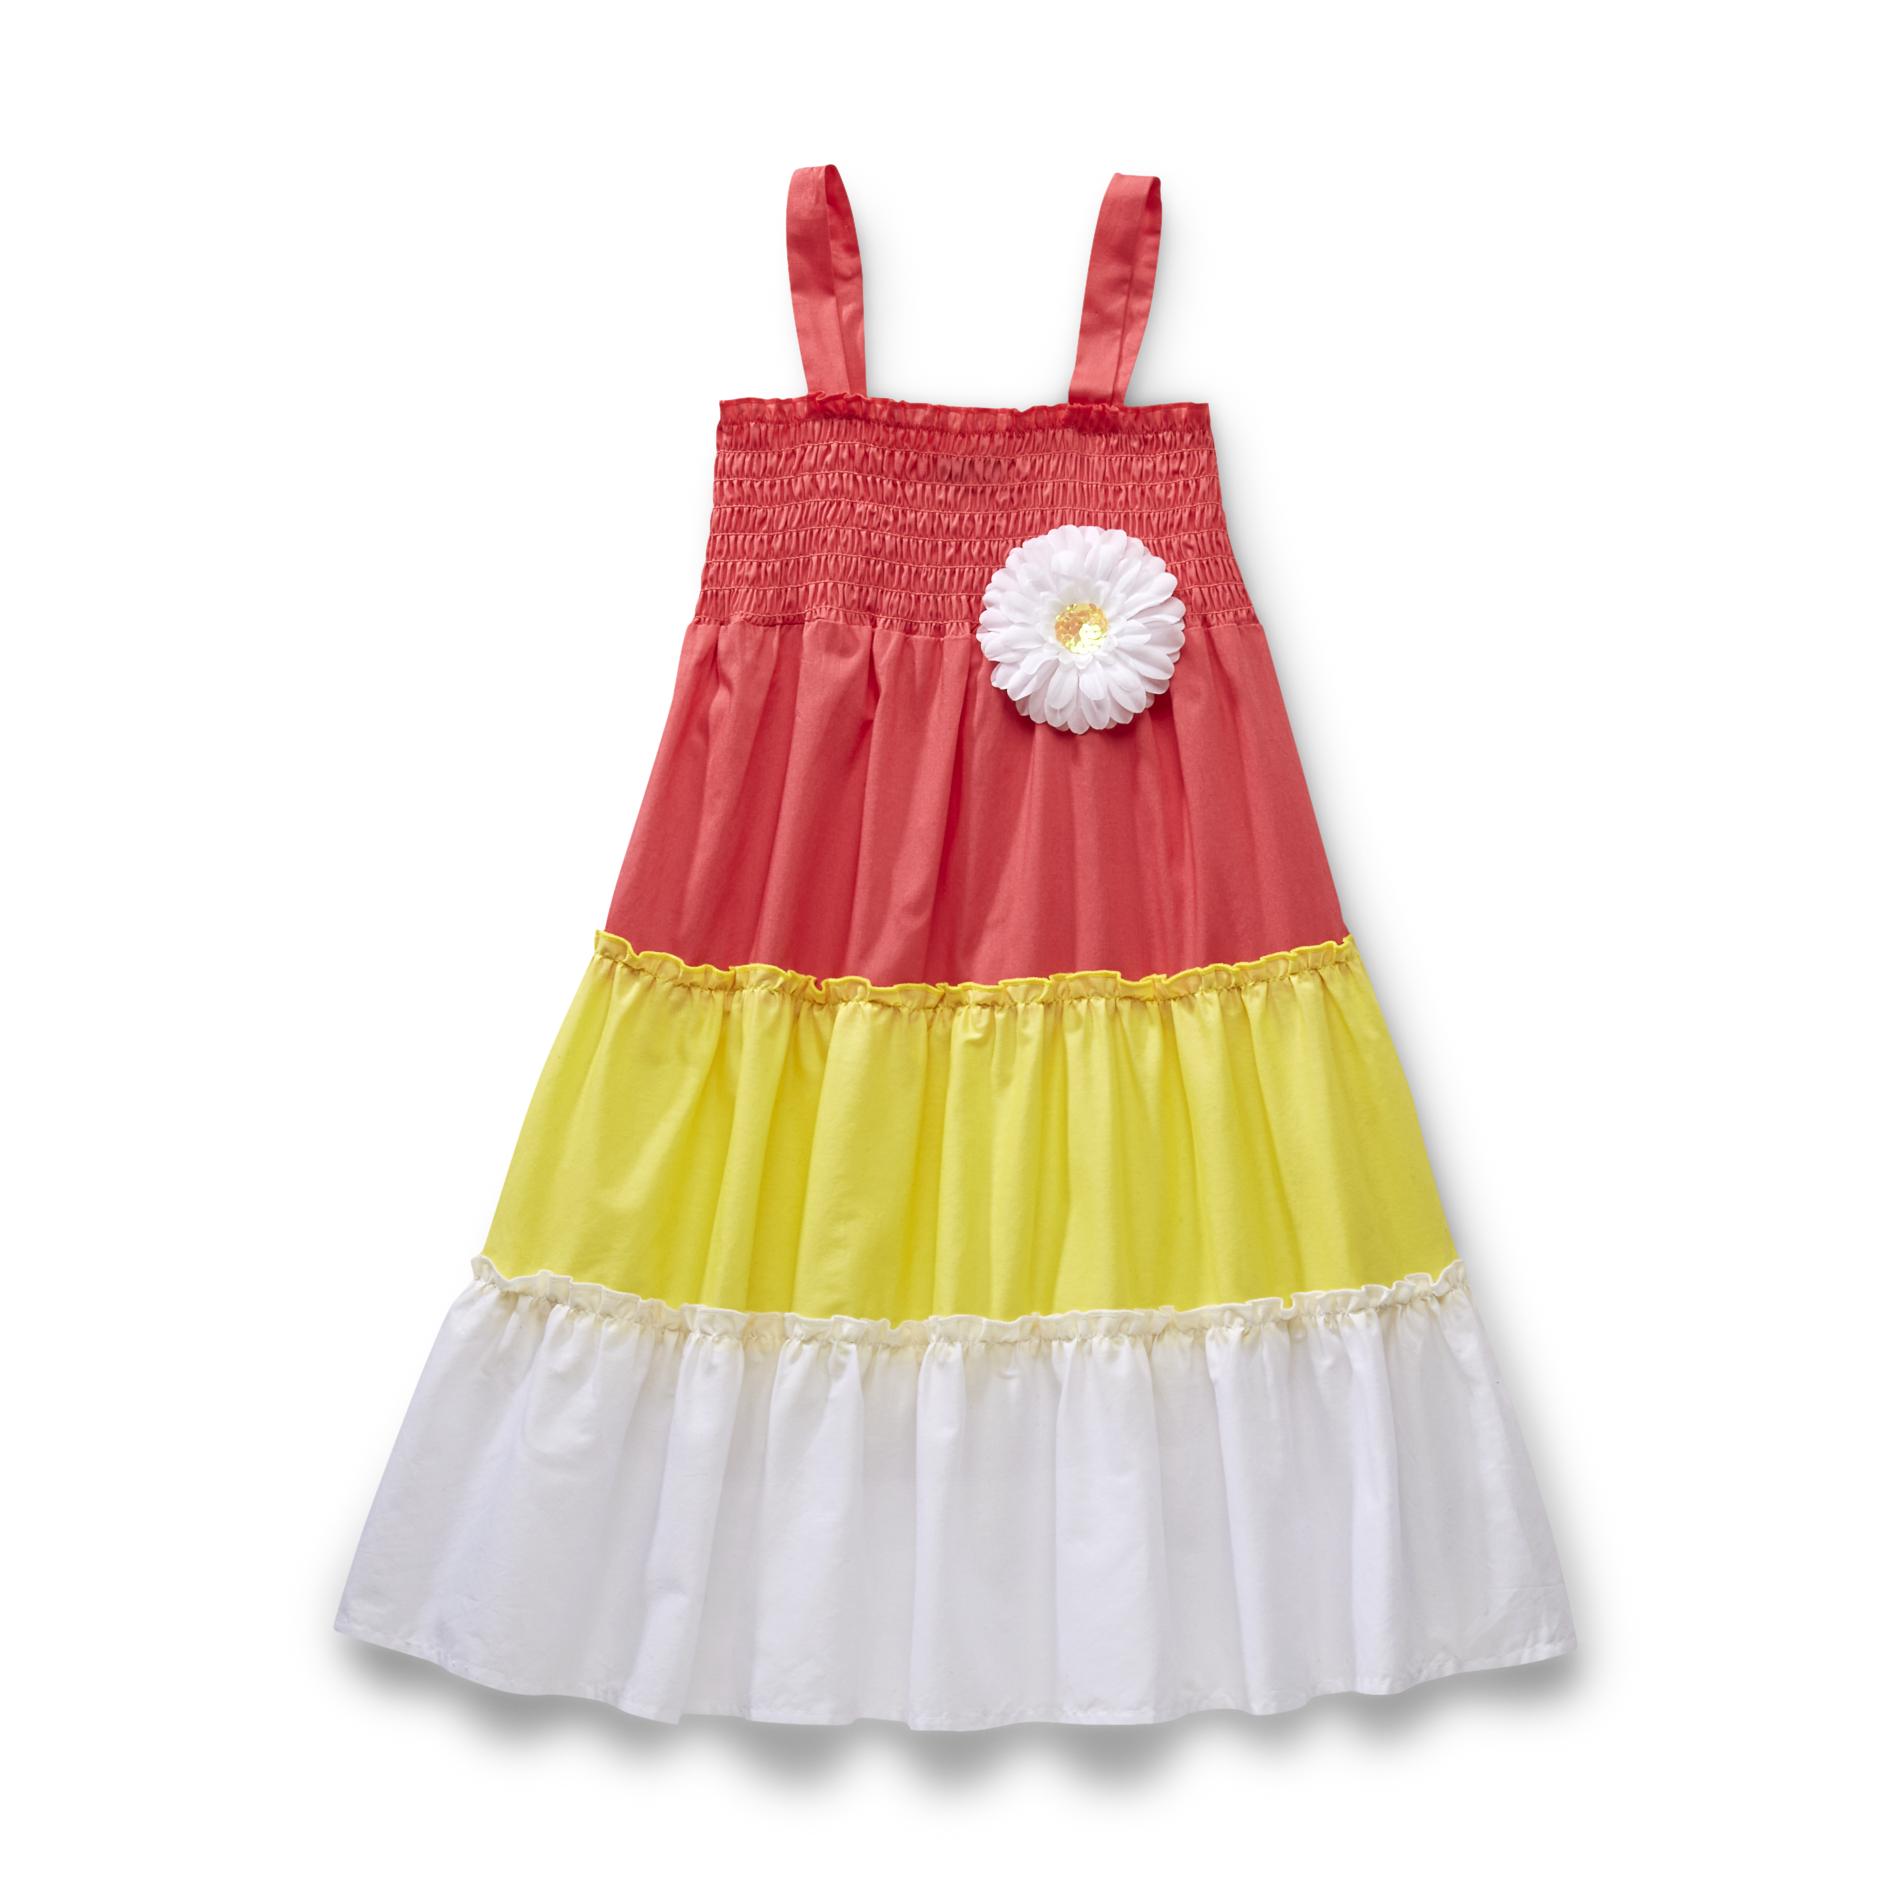 Basic Editions Girl's Tiered Sundress - Colorblock